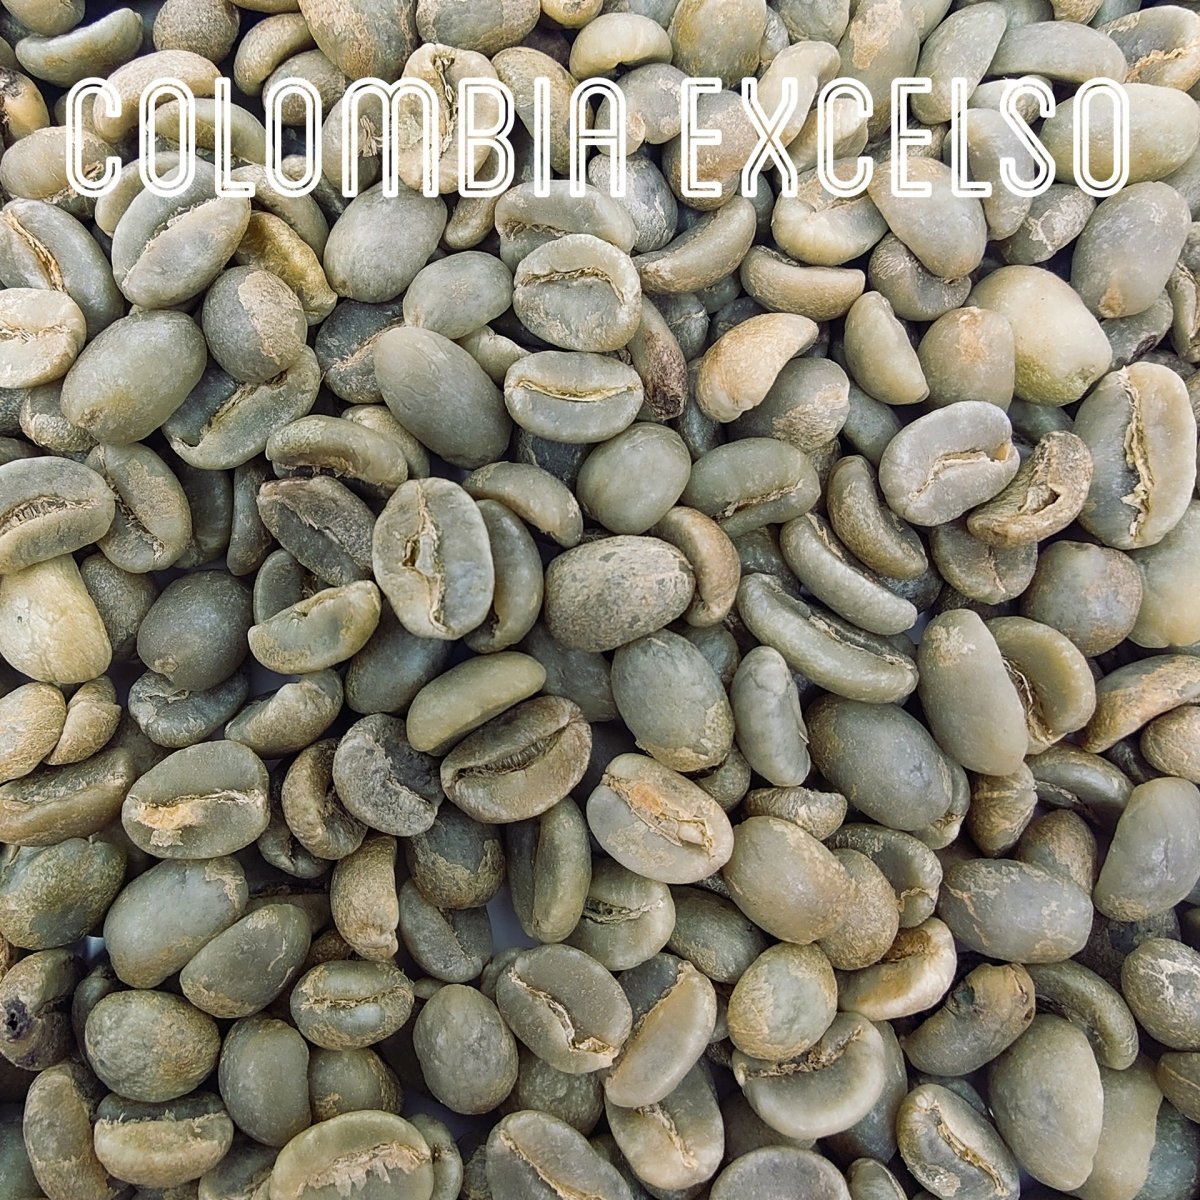 Green Unroasted Coffee Beans | Colombian Excelso | For the Home Roaster, 1kg - Brown Bear Coffee